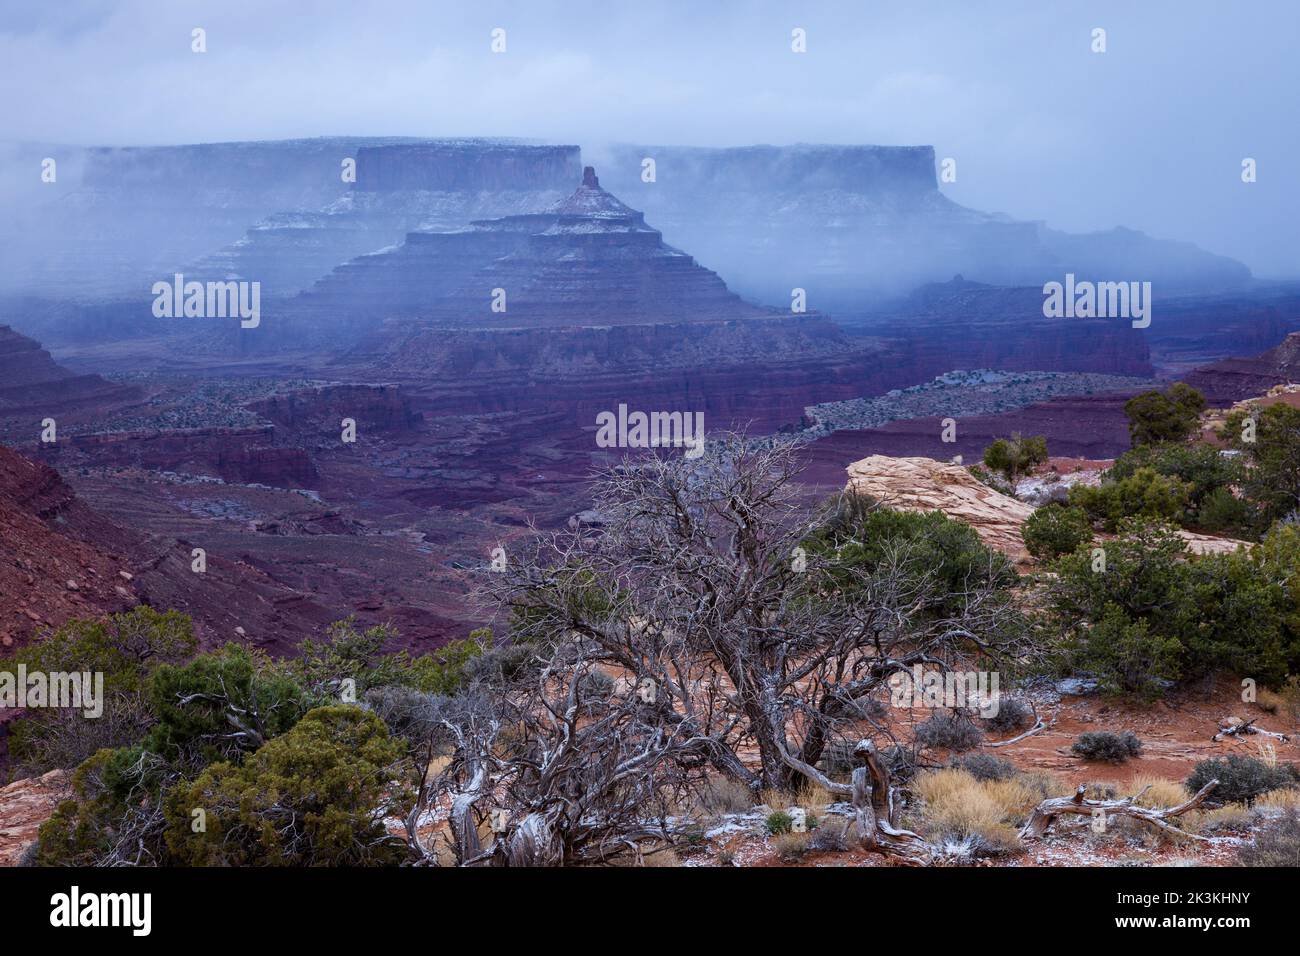 Stormy view of Shafer Canyon & Dead Horse Point from the Shafer Canyon Overlook in Canyonlands National Park, Utah. Stock Photo